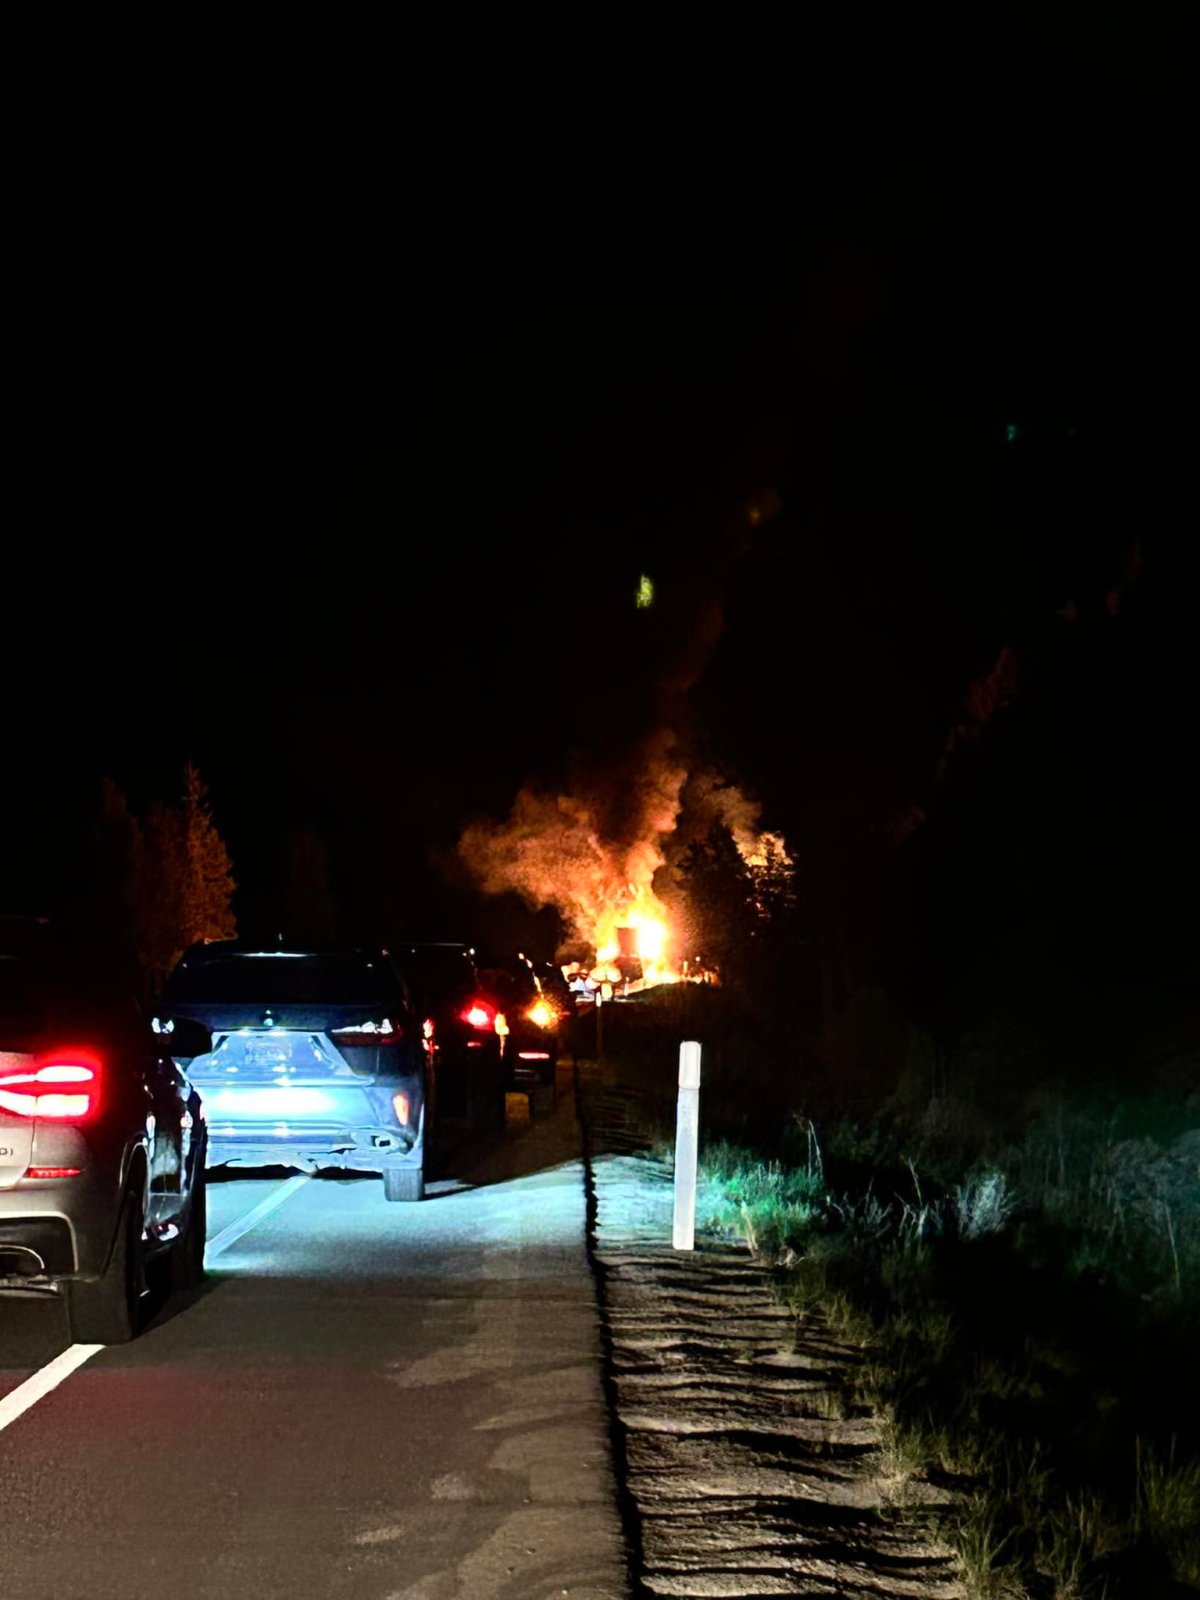 The Okanagan Connector is closed in both directions due to an early morning tractor fire.